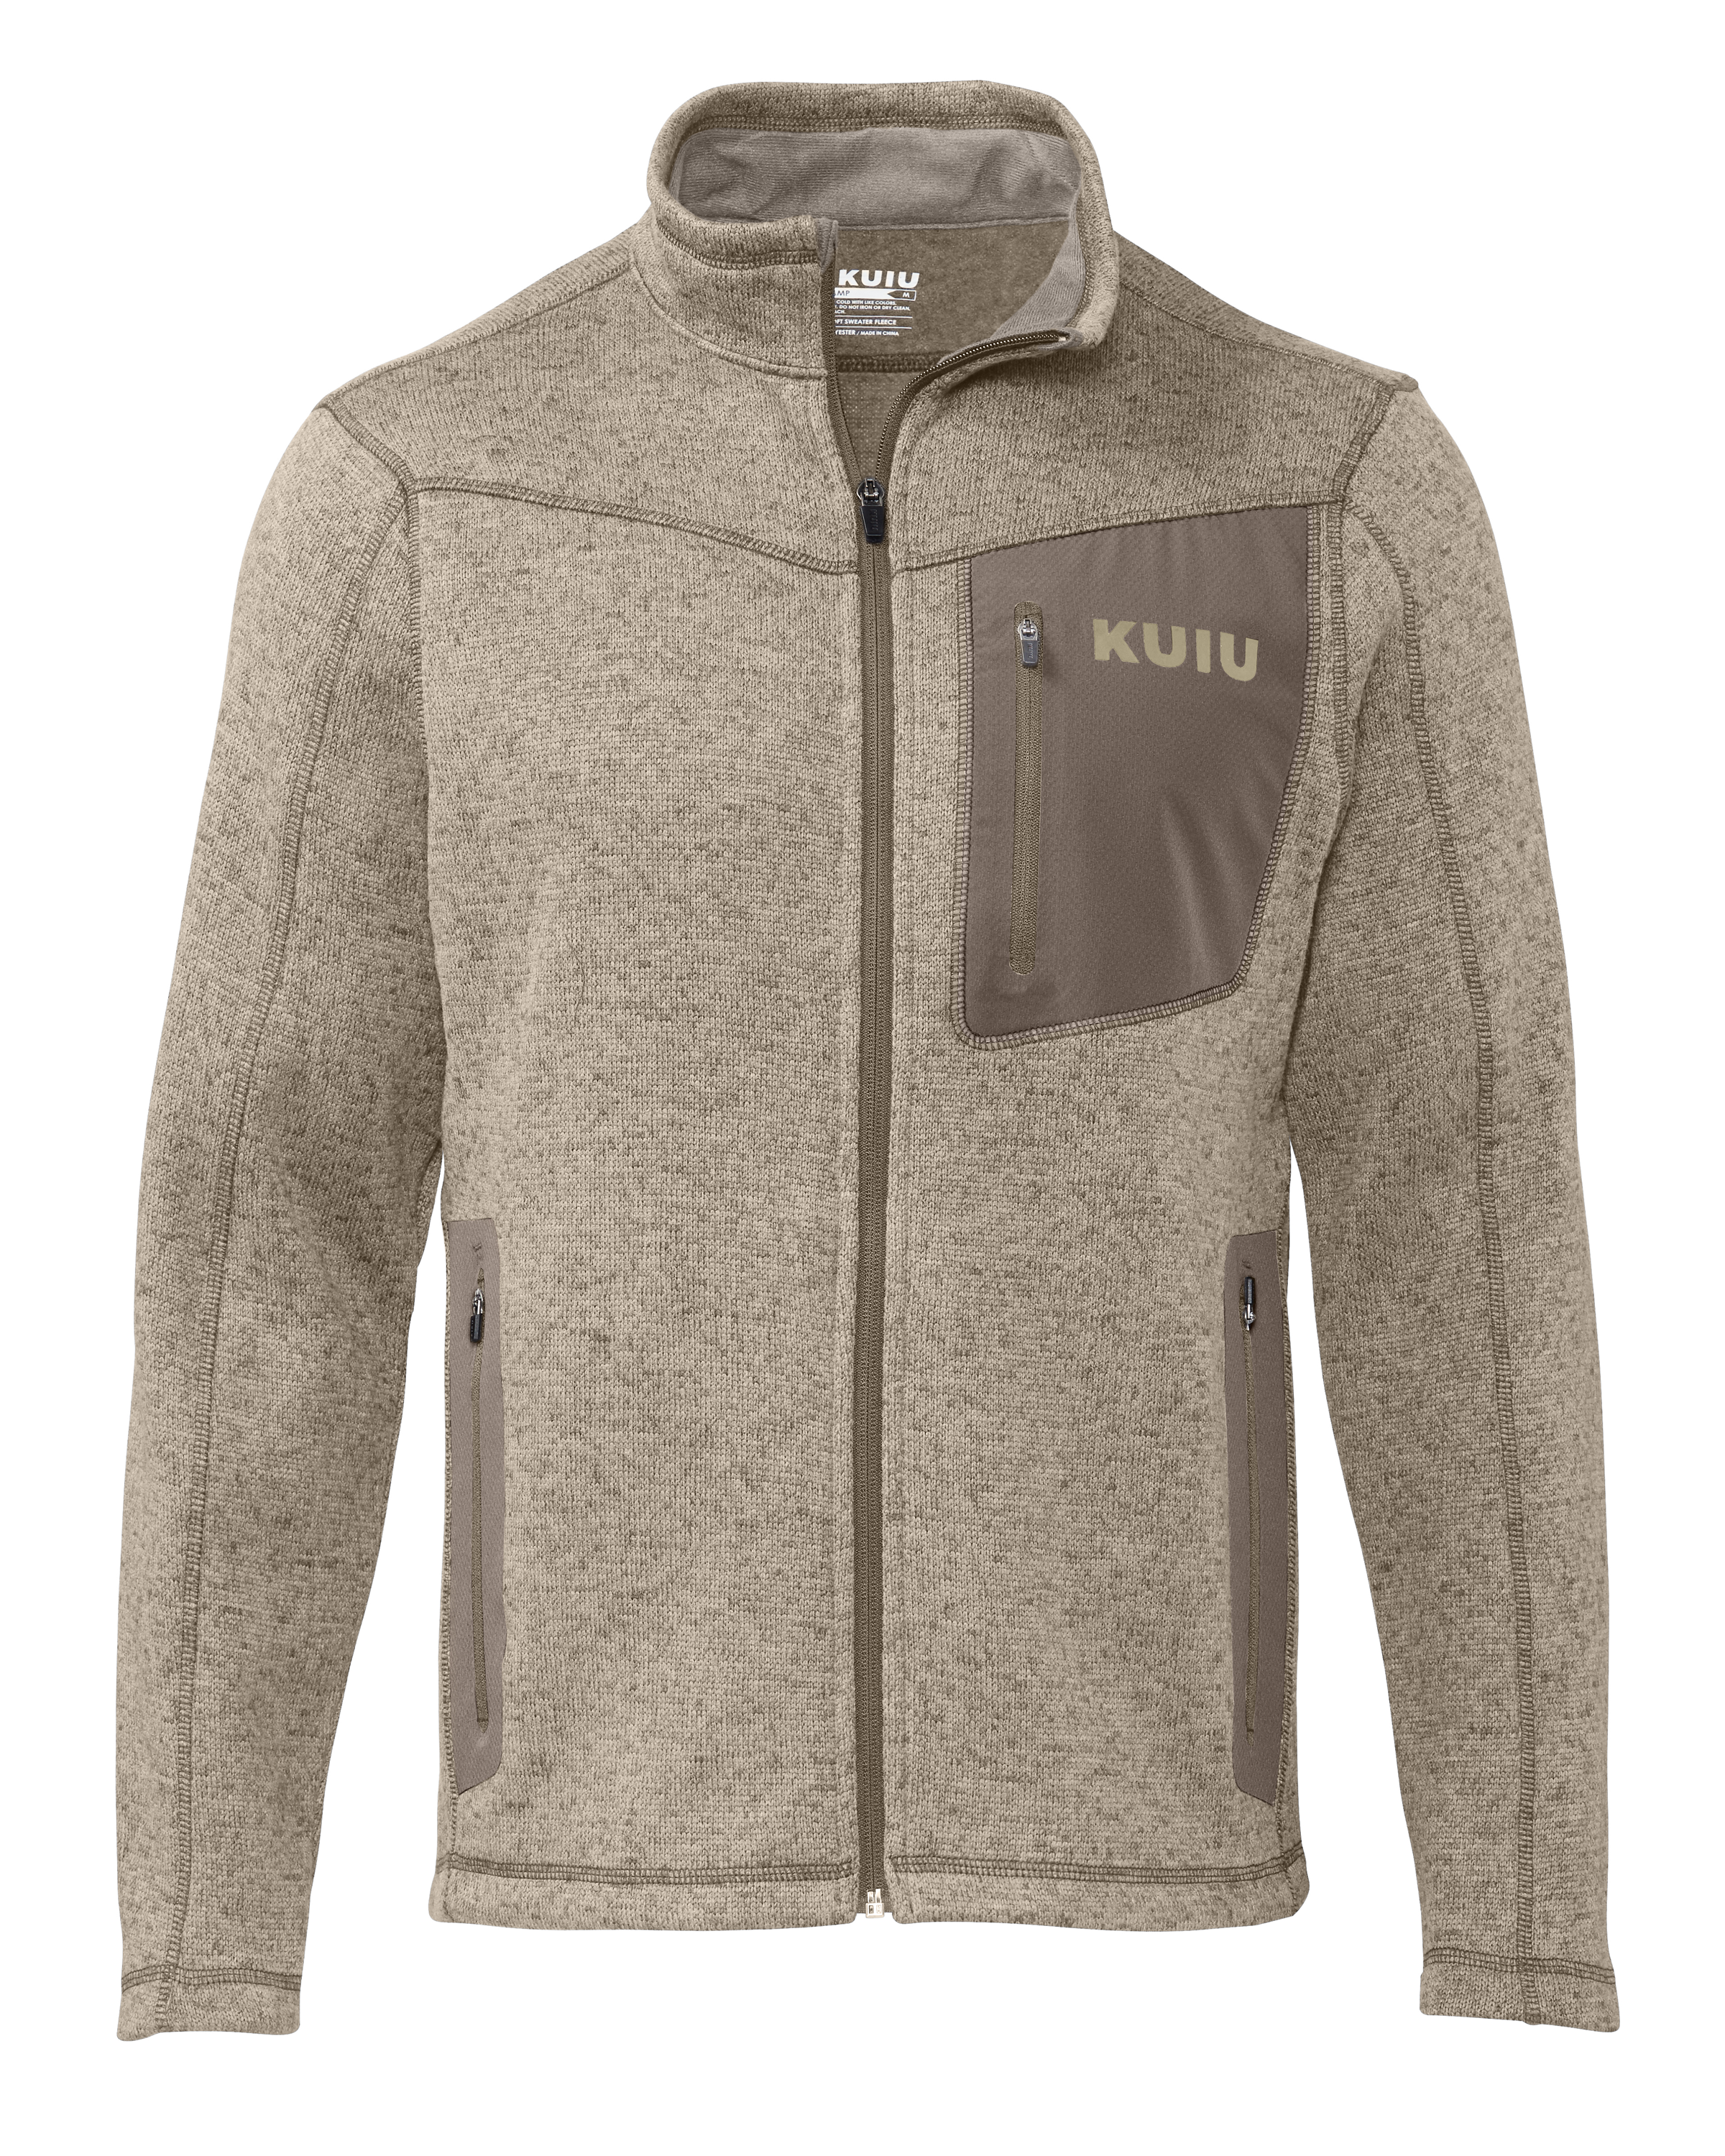 KUIU Outlet Base Camp Full Zip Sweater in Khaki | Size 3XL